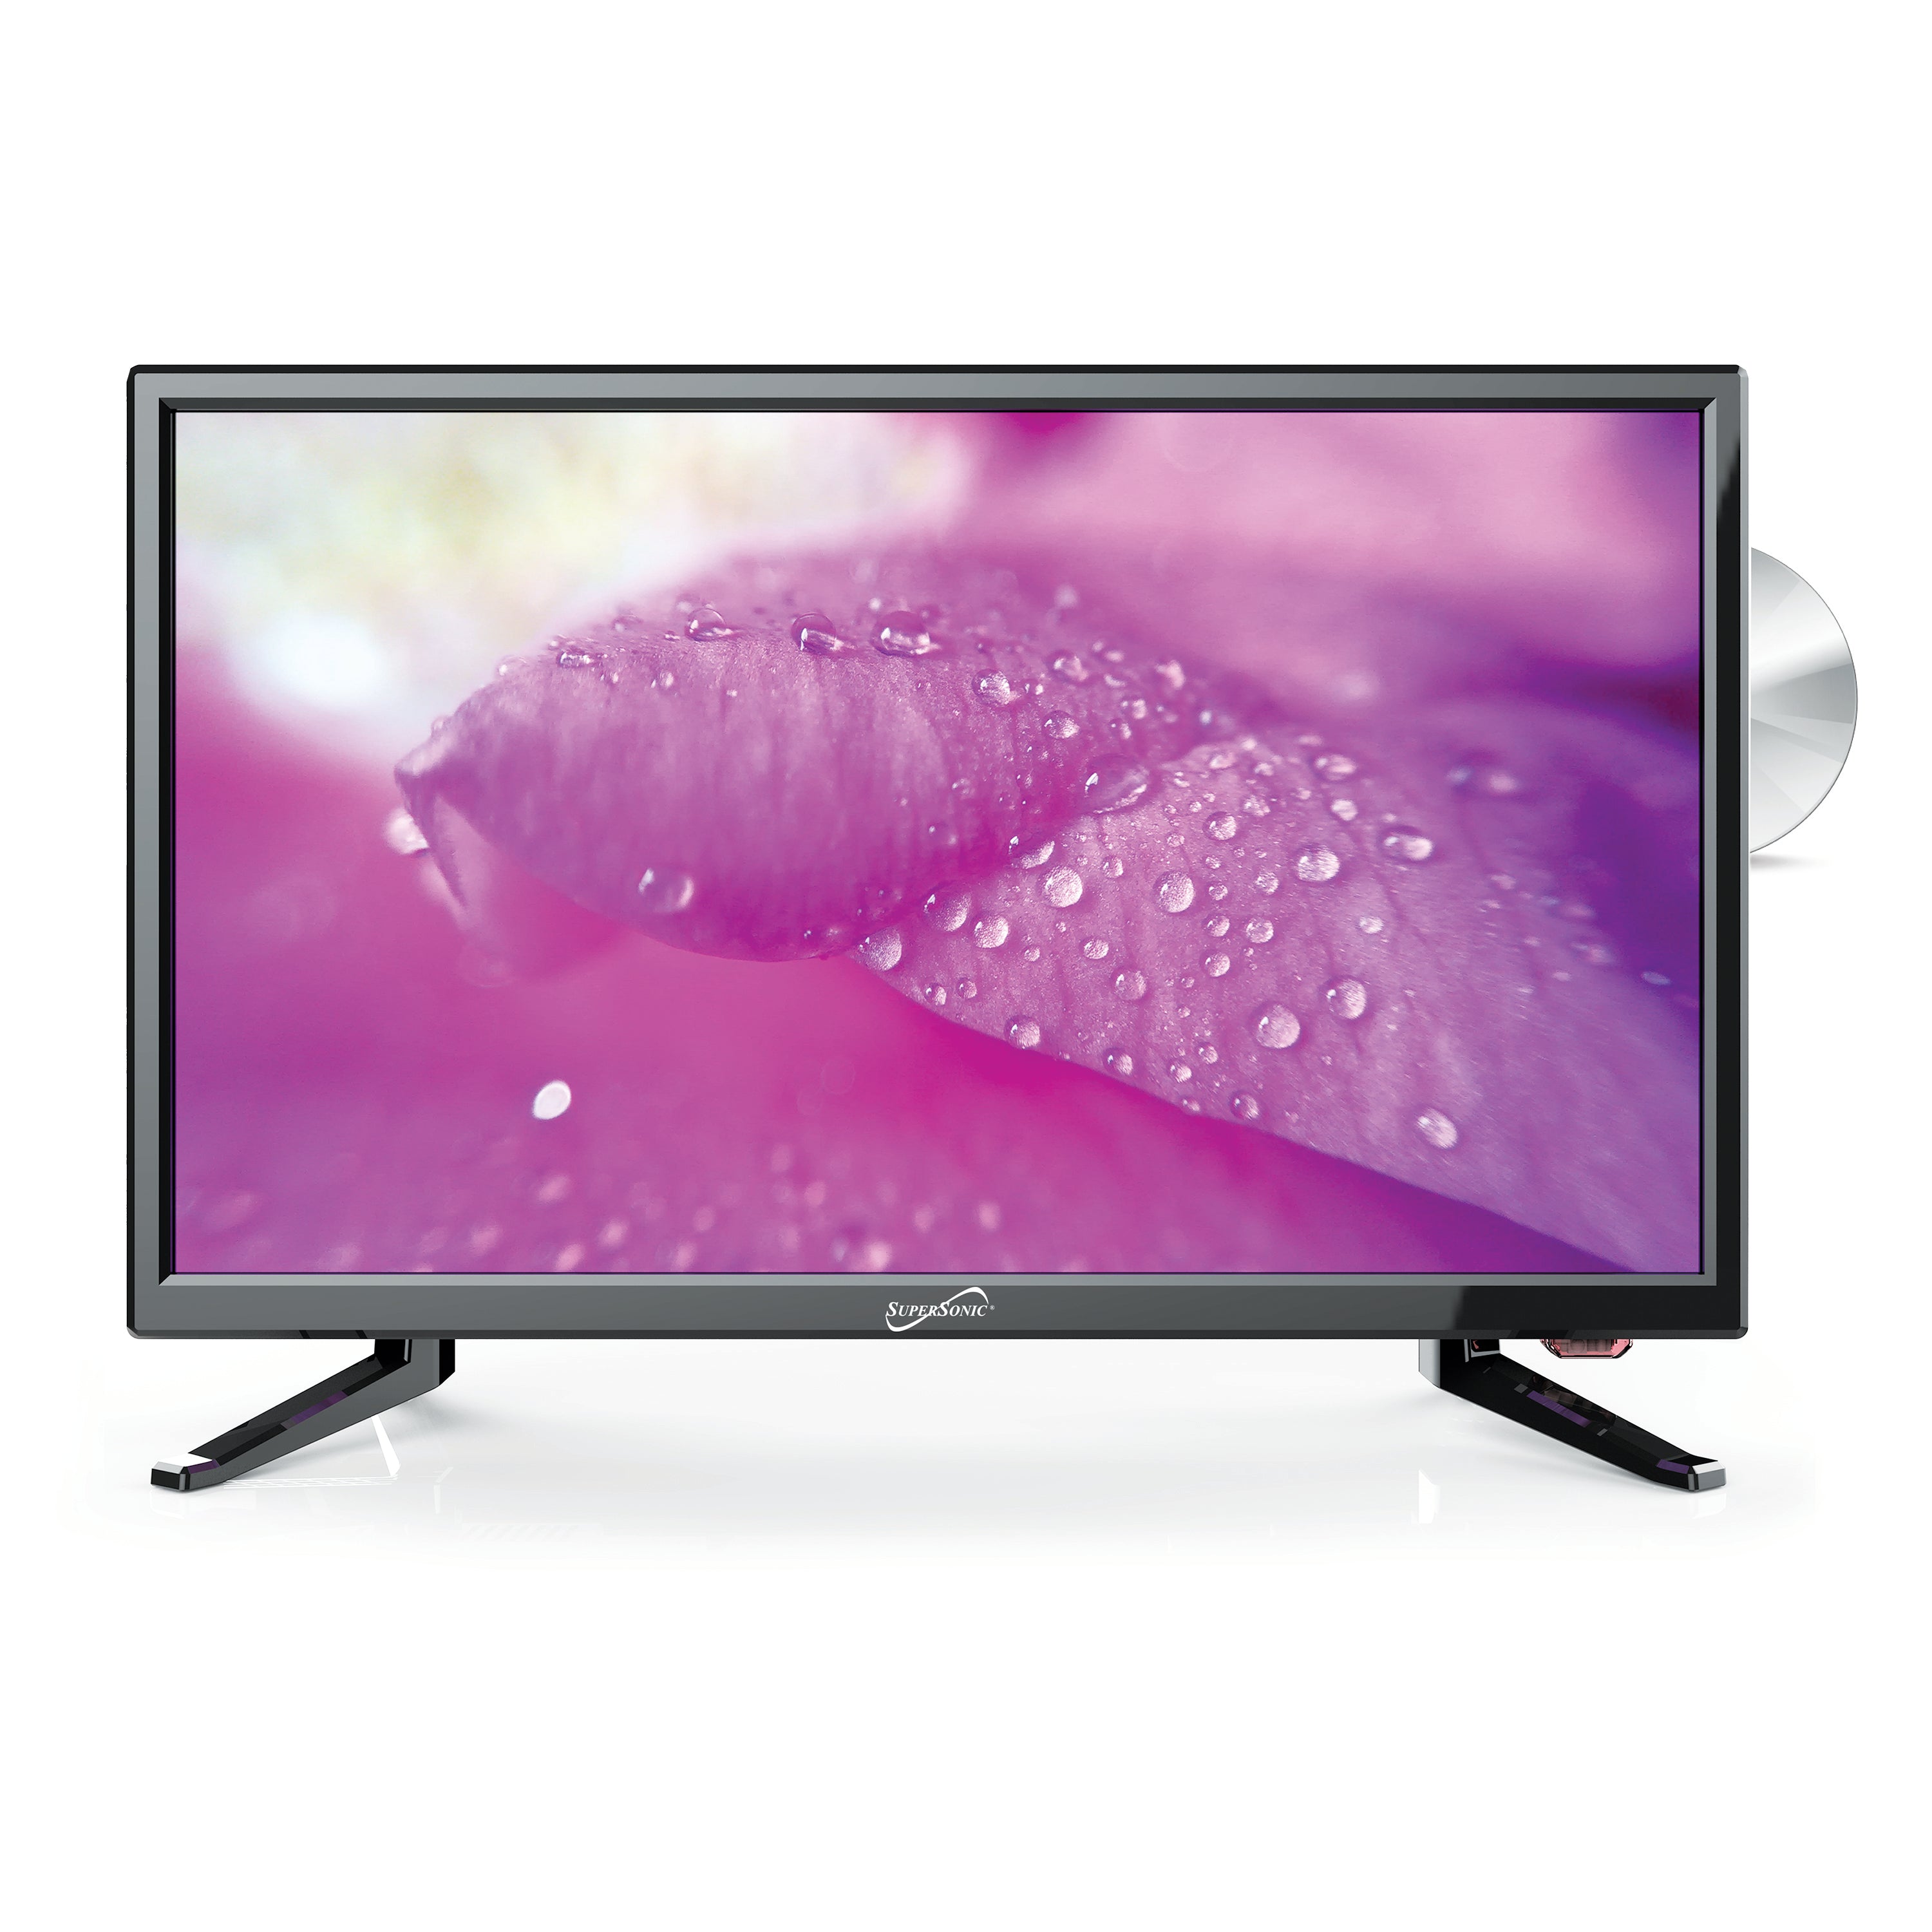 22” Widescreen LED HDTV with DVD – Supersonic Inc